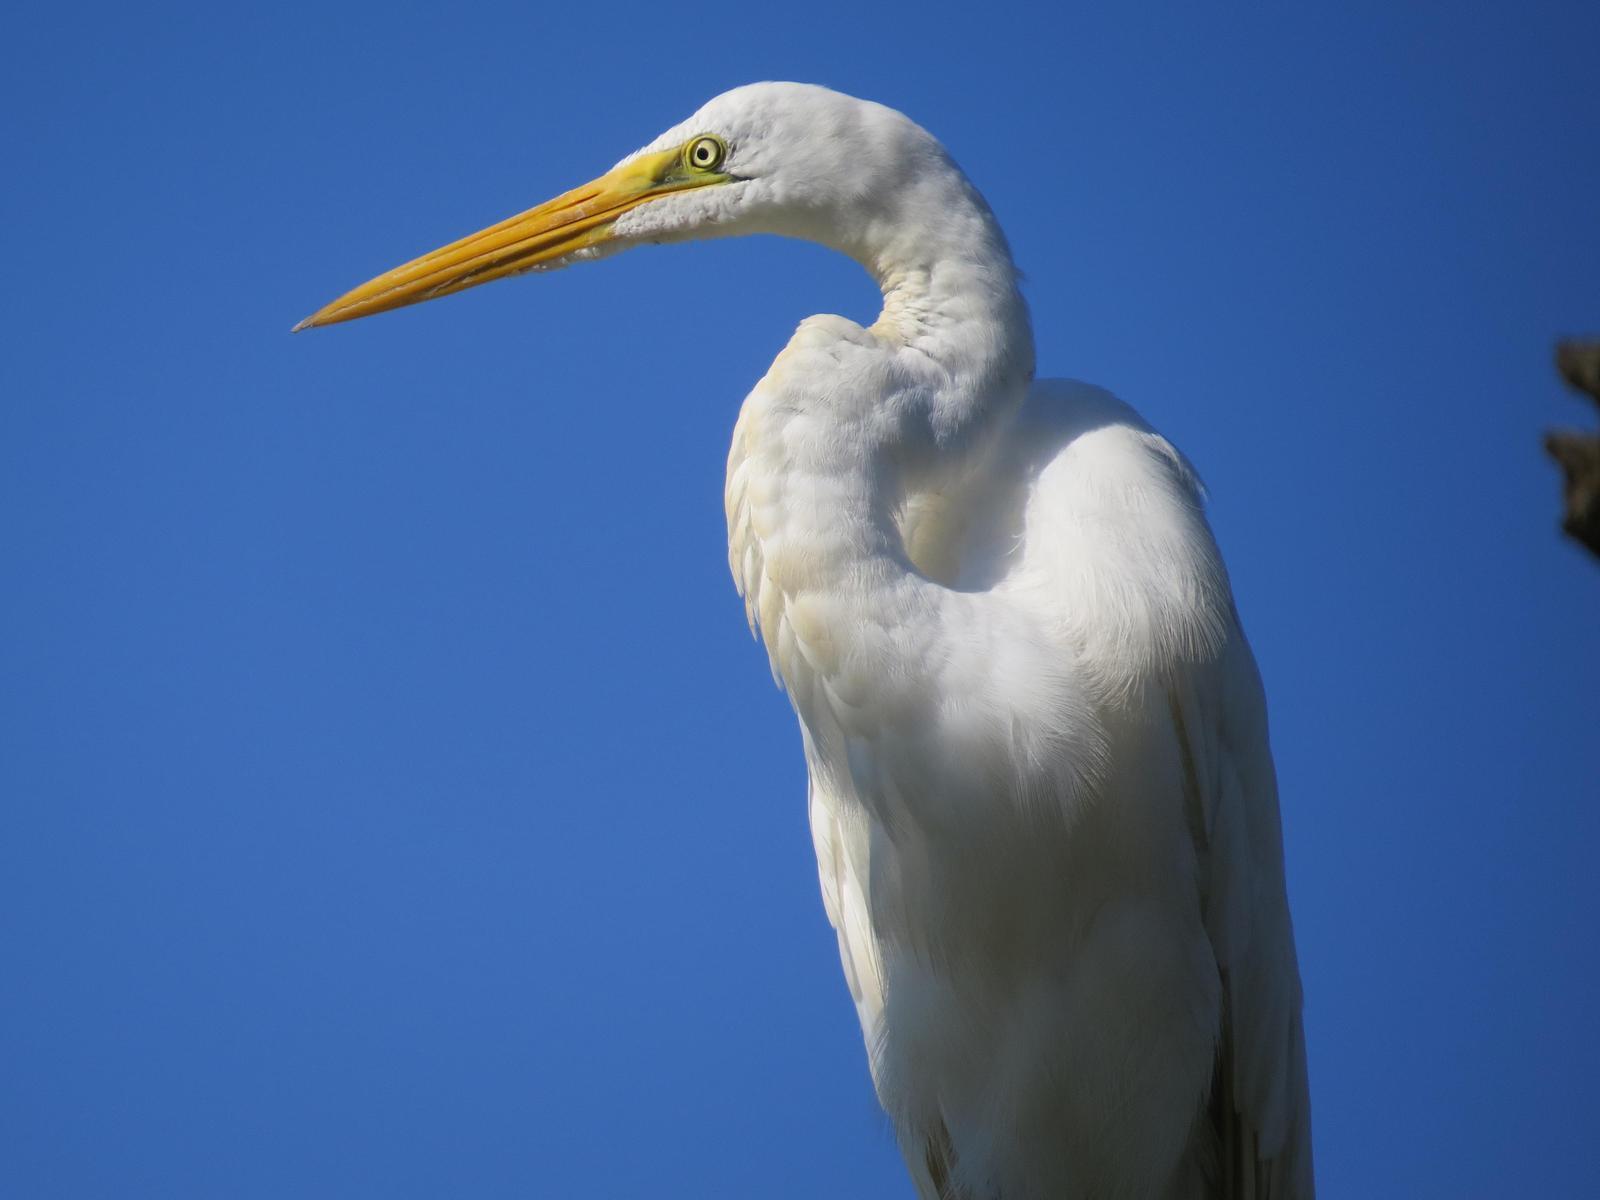 Great Egret Photo by Kathy Wooding